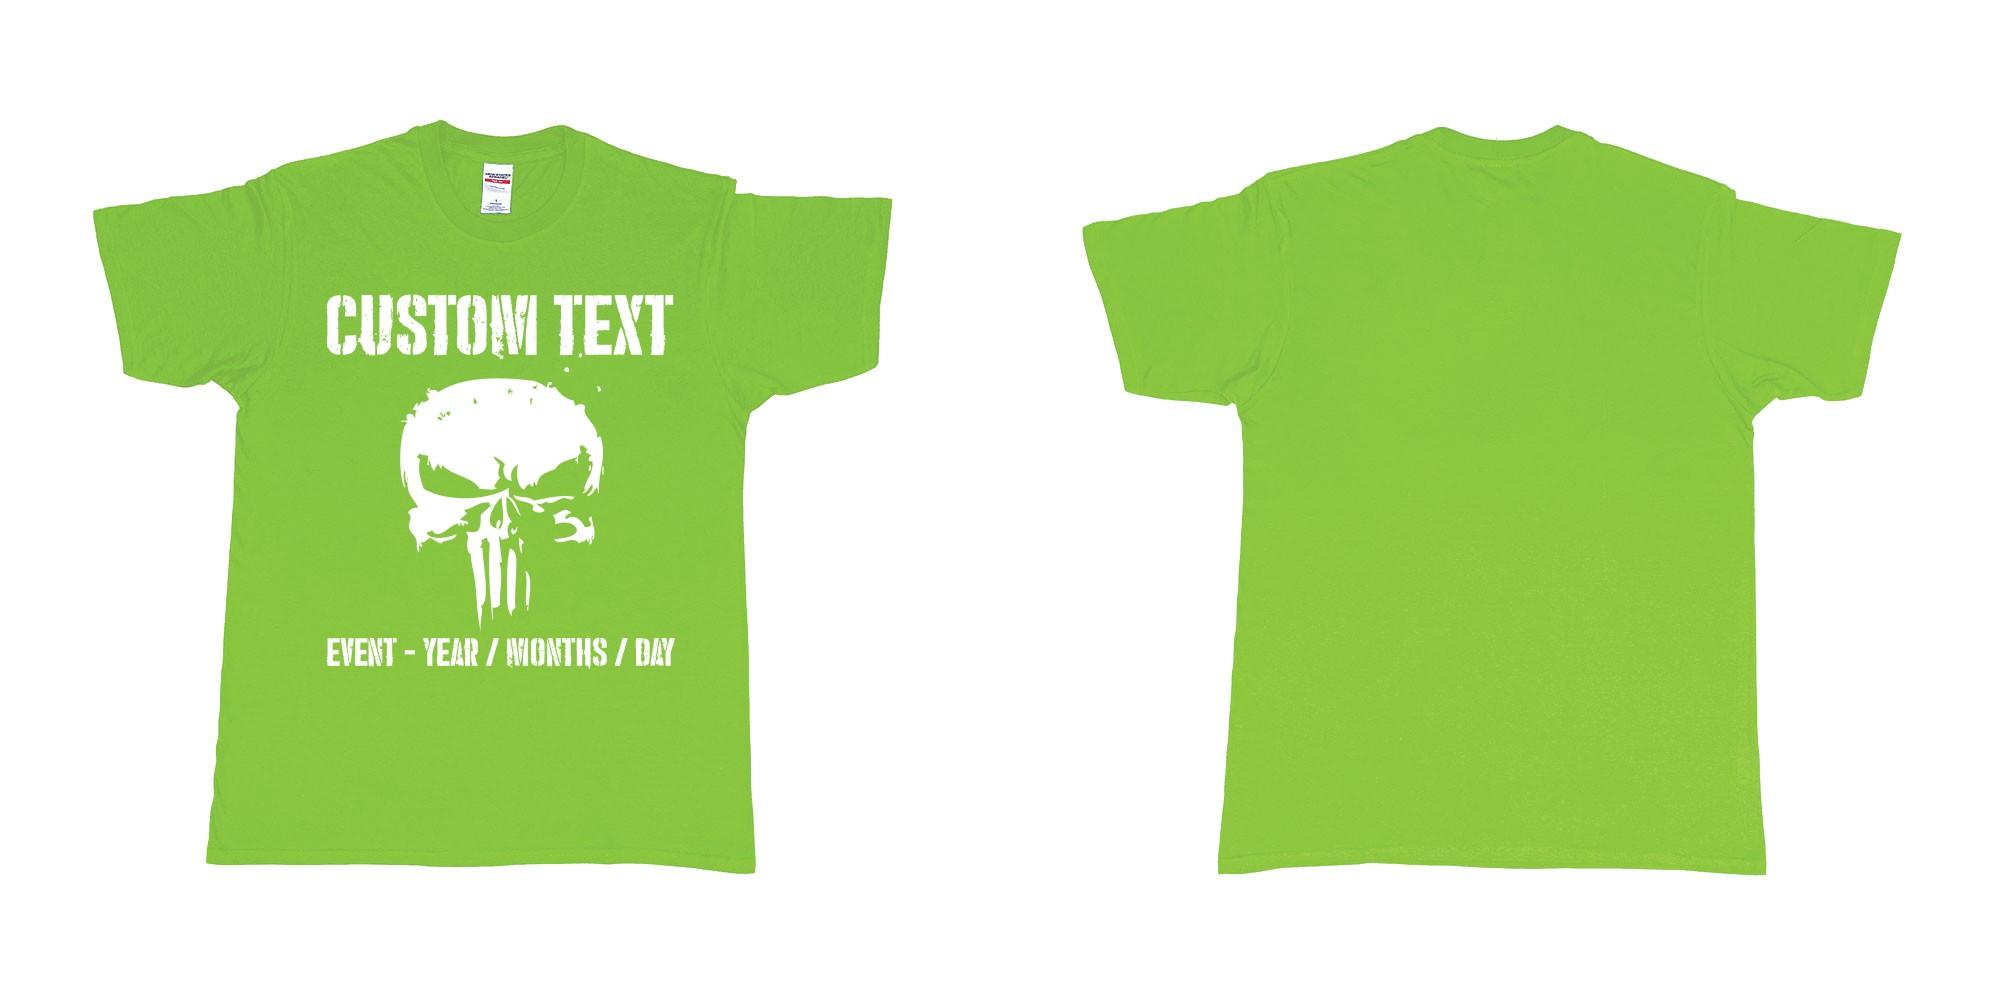 Custom tshirt design the punisher scull logo custom text in fabric color lime choice your own text made in Bali by The Pirate Way